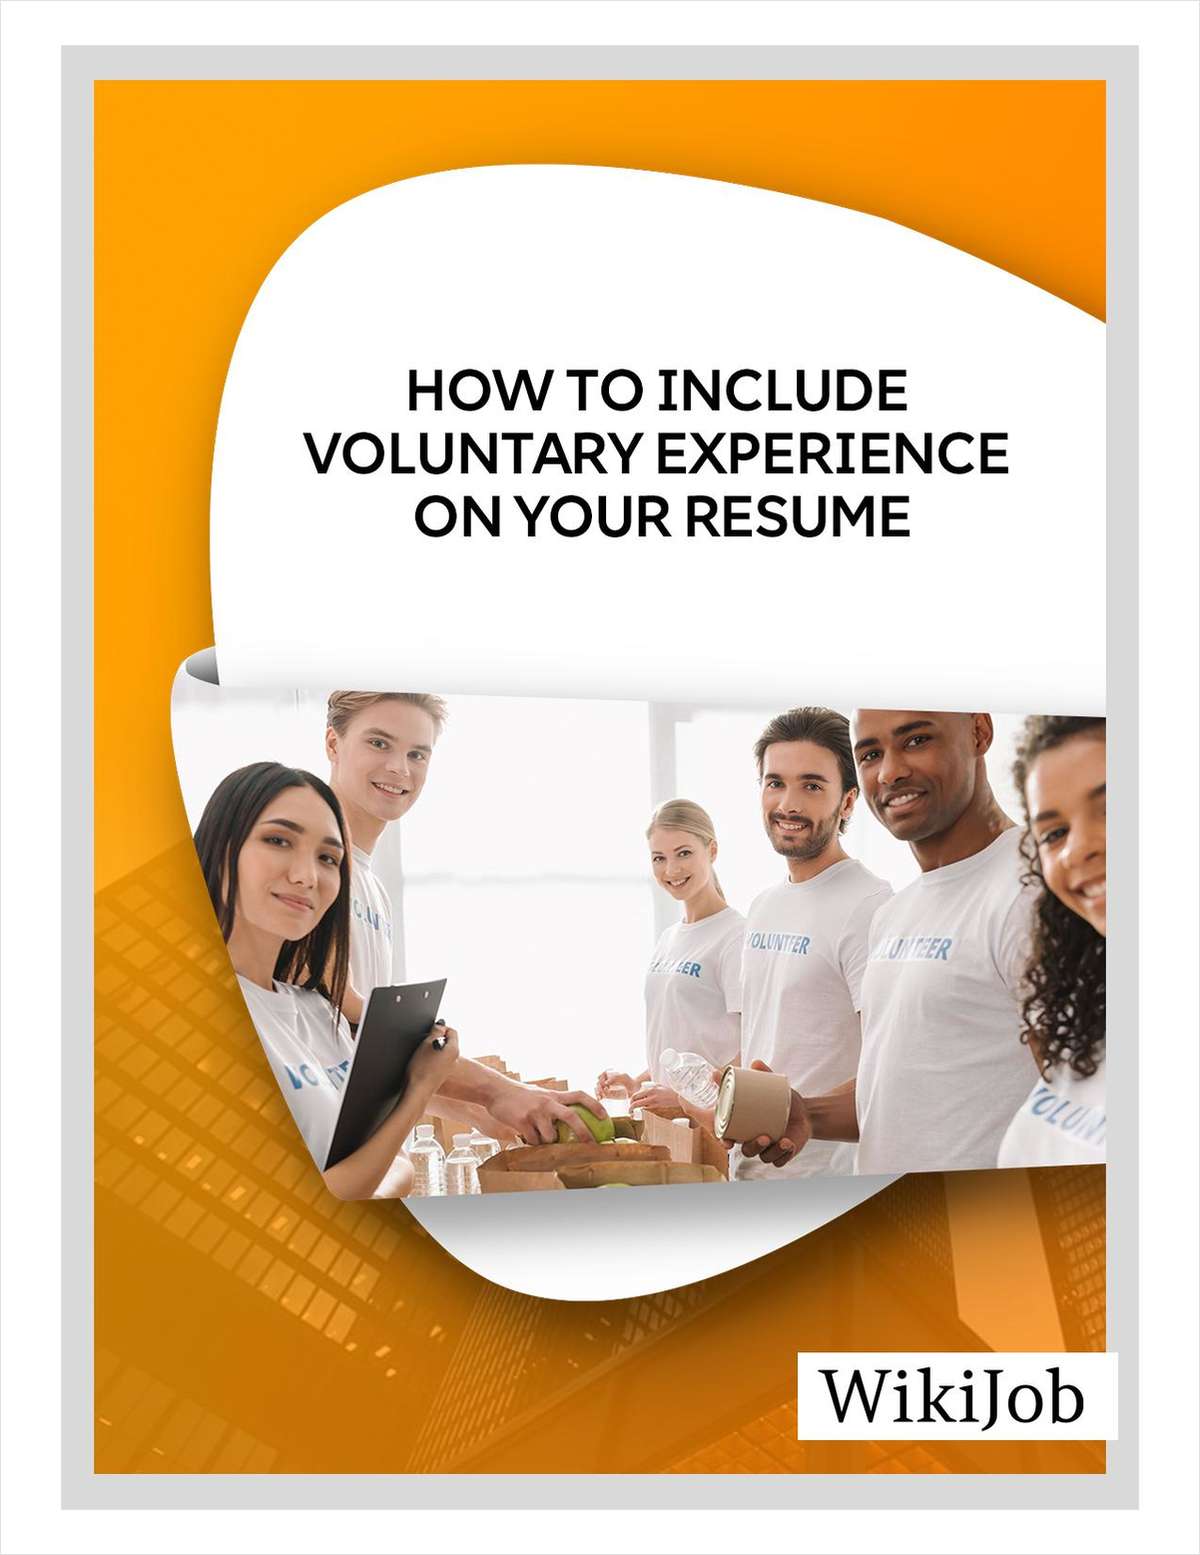 How to Include Voluntary Experience on Your Resume